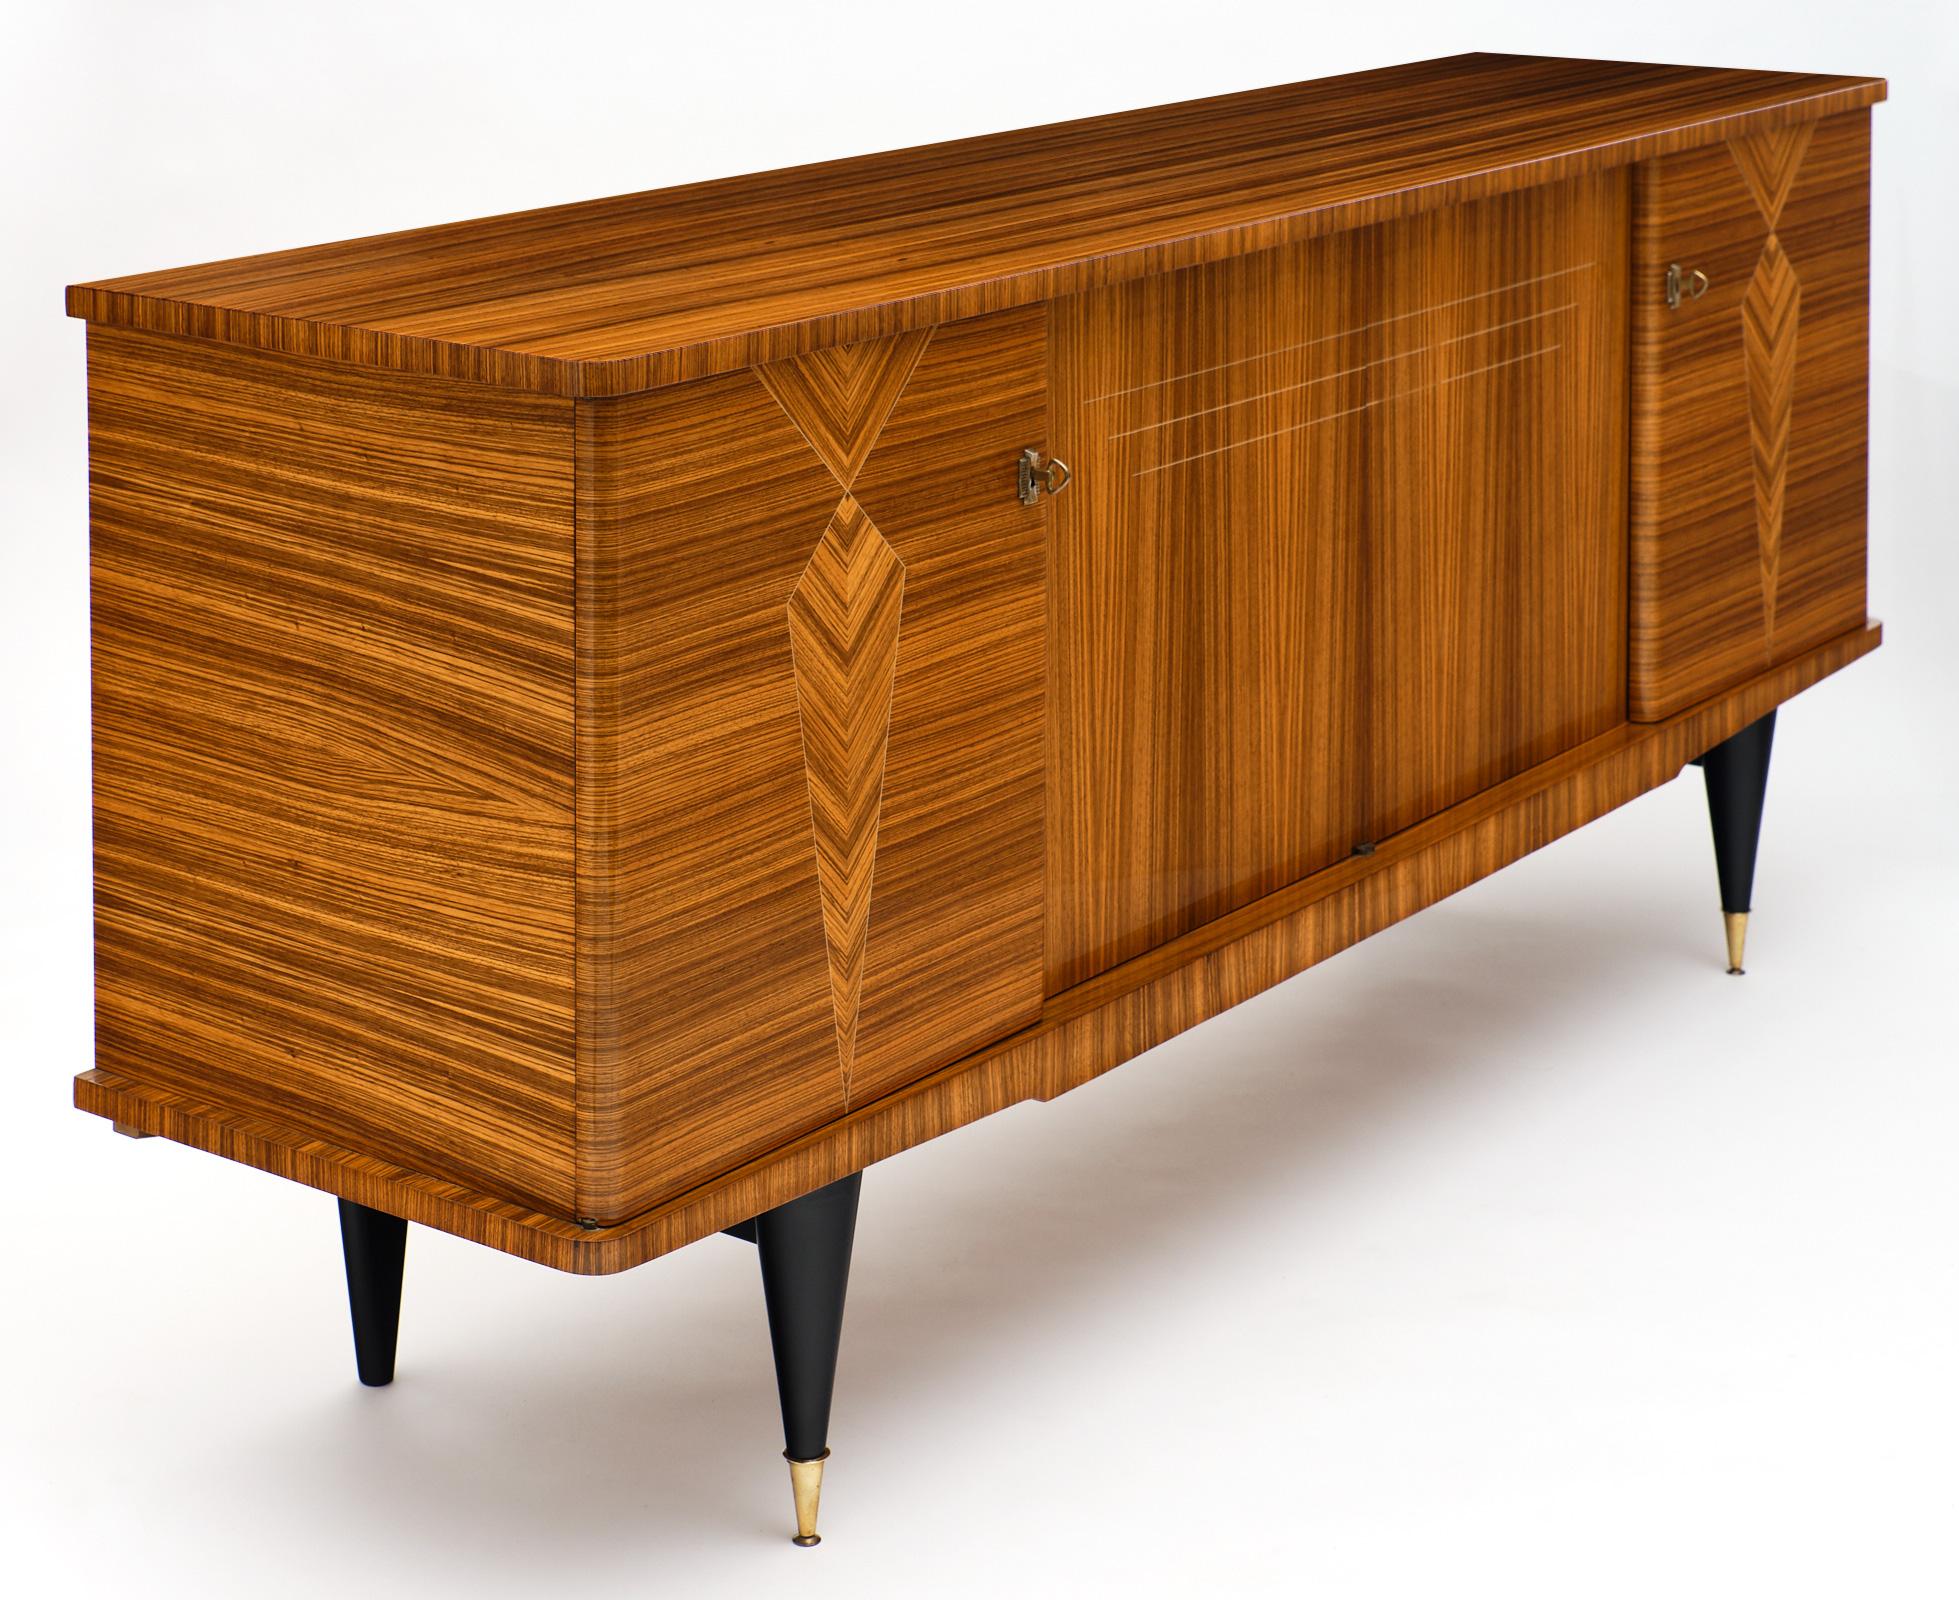 French midcentury rosewood buffet with superb rosewood veneer marquetry and parquetry. This piece displays very high levels of craftsmanship. The four doors open to reveal ample storage space and a lemon wood interior. There are shelves and two